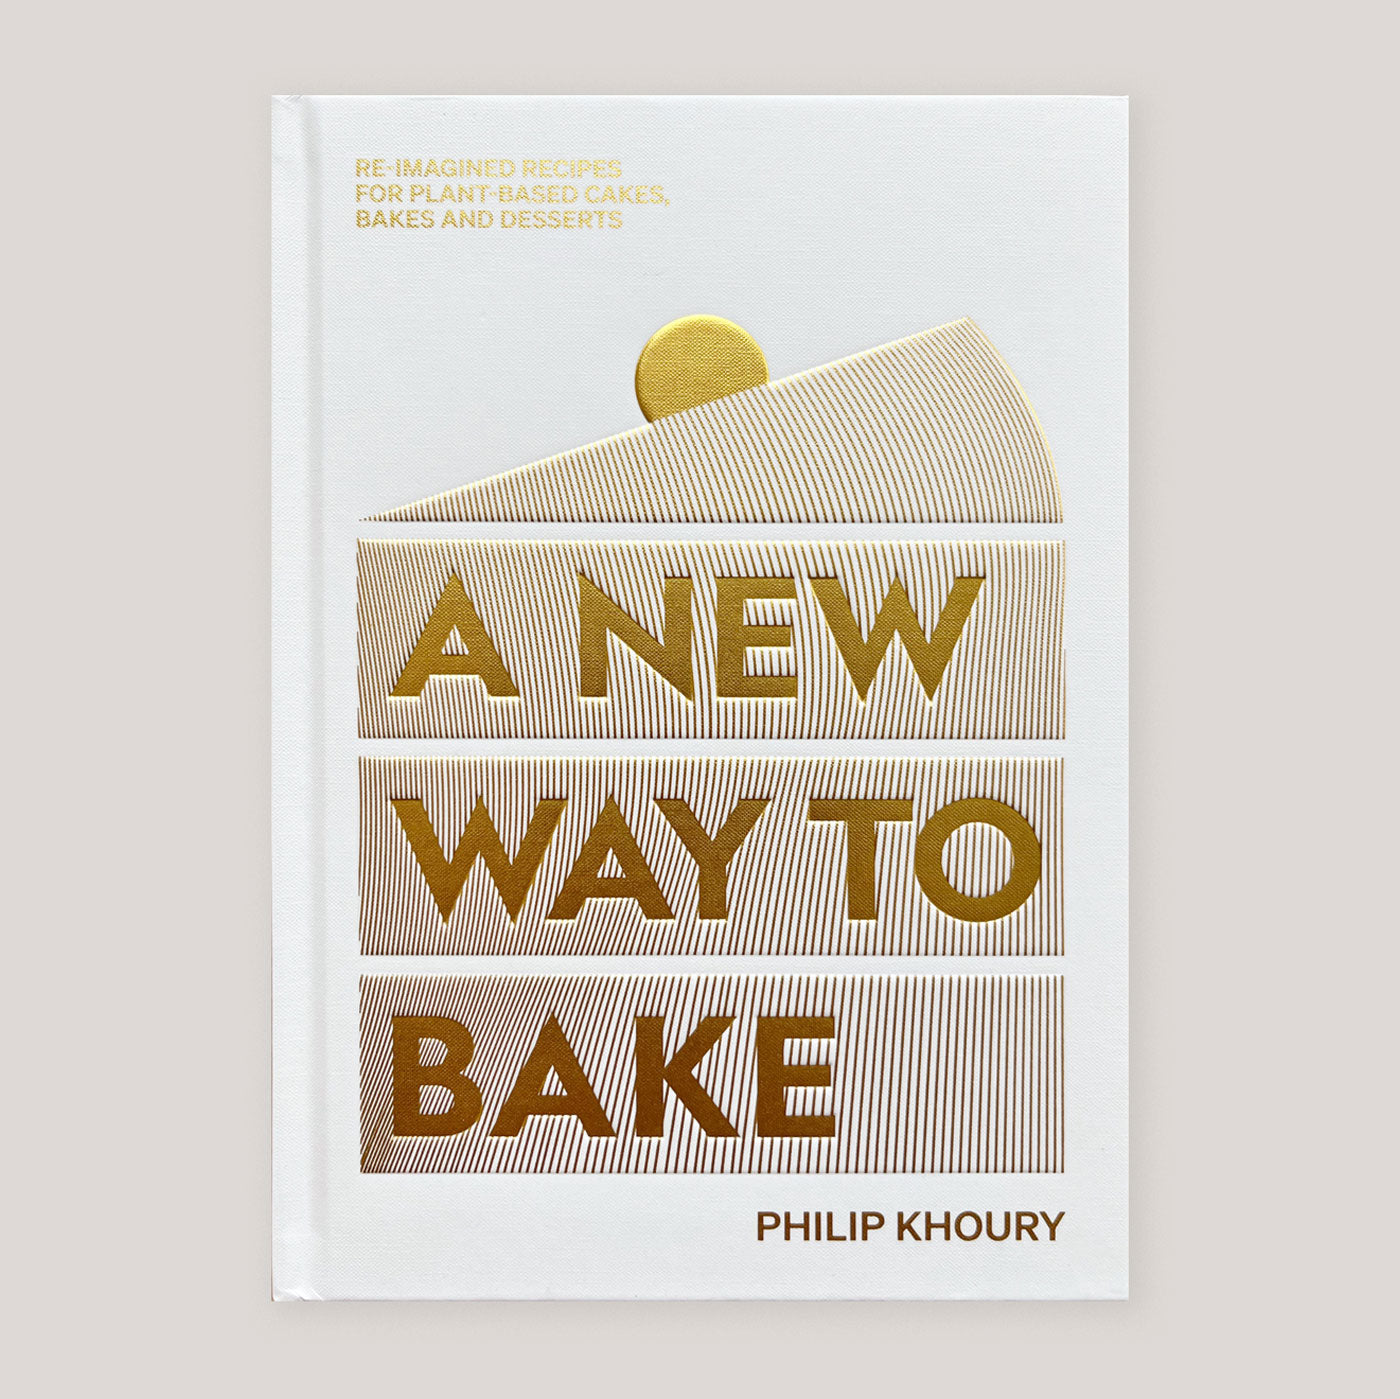 A New Way to Bake: Re-Imagined Recipes for Plant-Based Cakes, Bakes and Desserts | Philip Khoury | Colours May Vary 